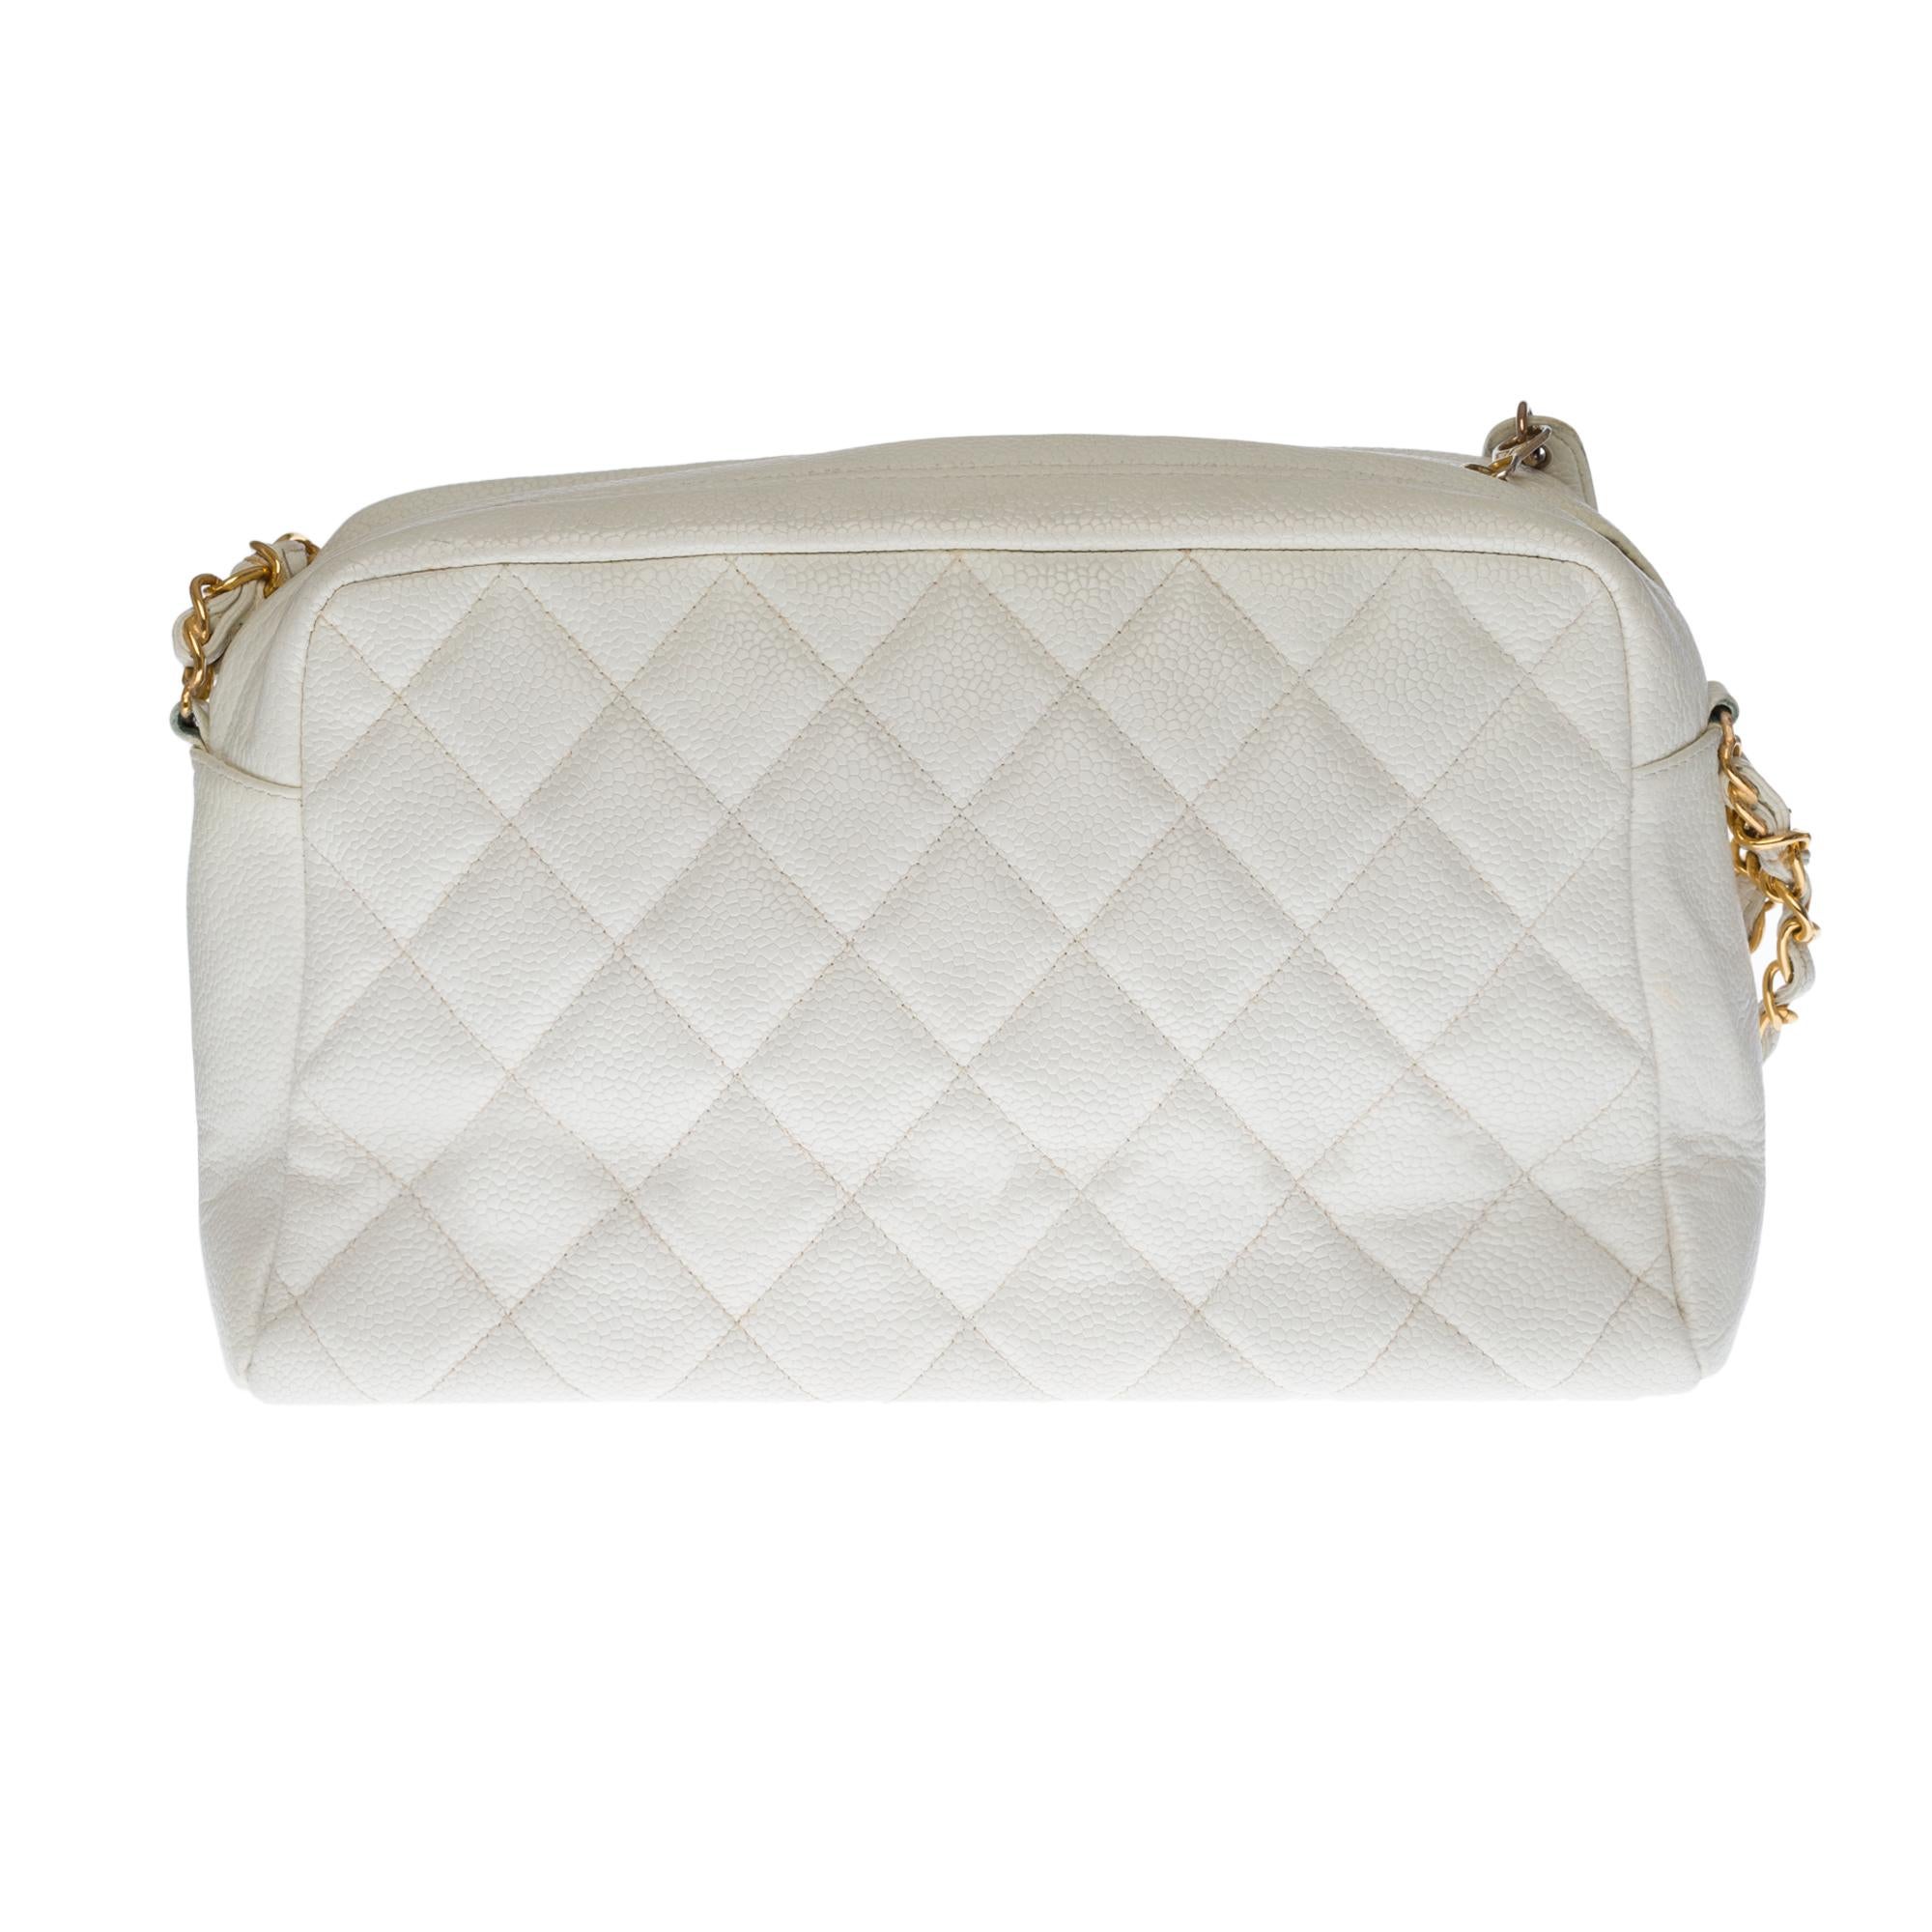 Stunning Chanel Classic shoulder bag in white caviar quilted leather, gold-tone metal hardware, double chain handle in gold-tone metal intertwined with white leather allowing a hand, shoulder or shoulder strap
White leather lining, 1 zip pocket, 1